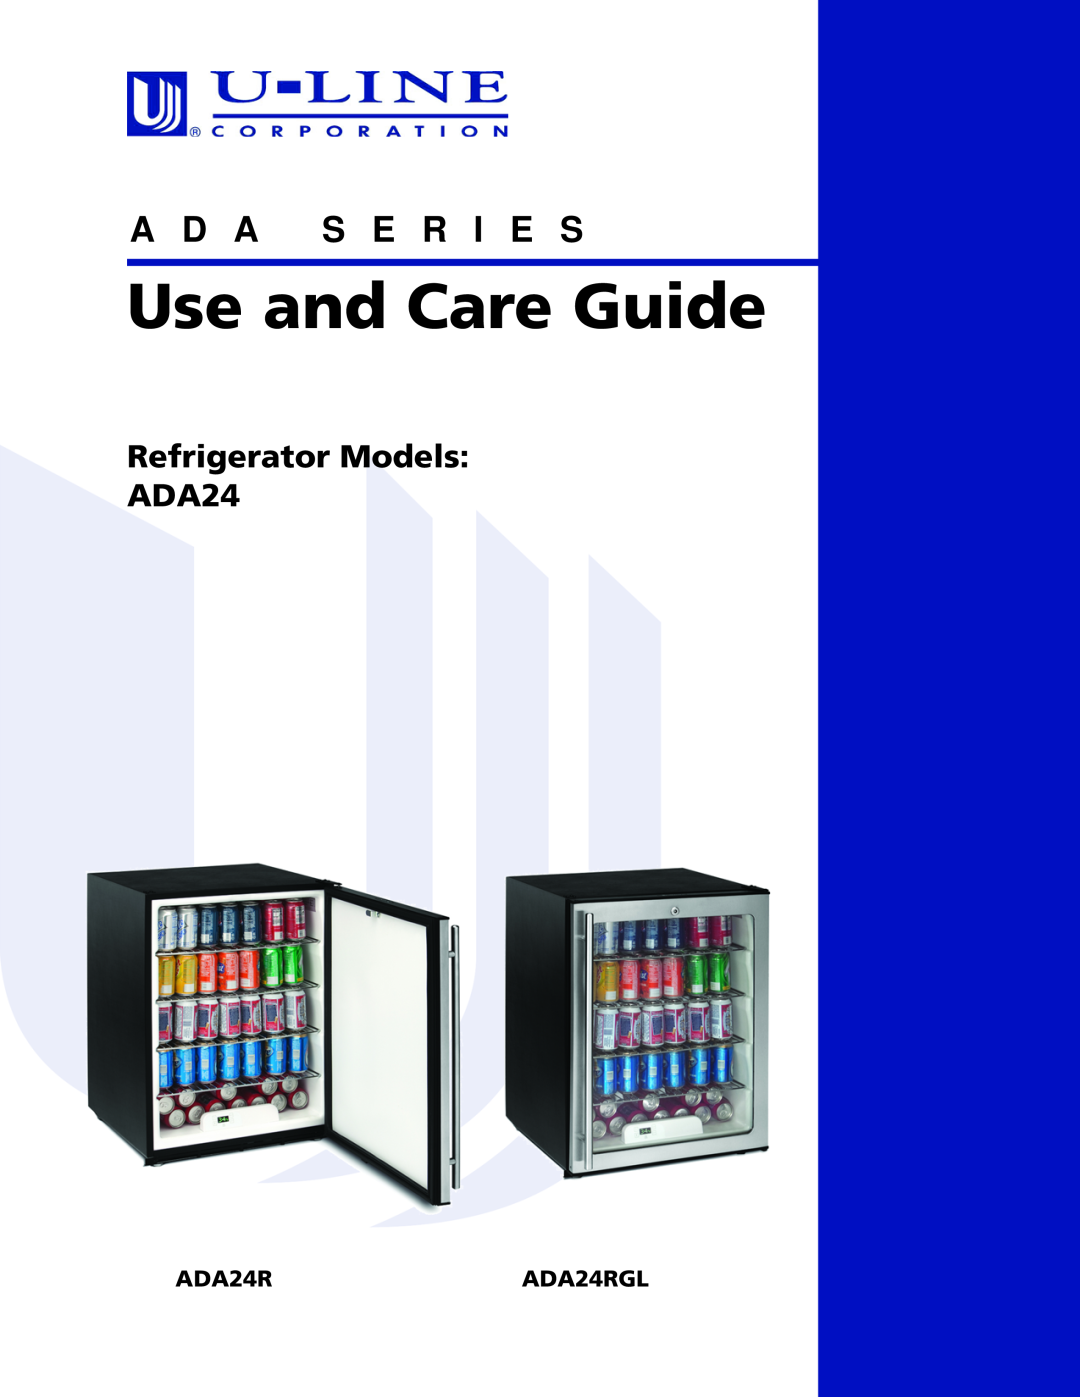 U-Line ADA24R manual A D A 2 4 R, R E F R I G E R A T O R S, Features, ADA Series 